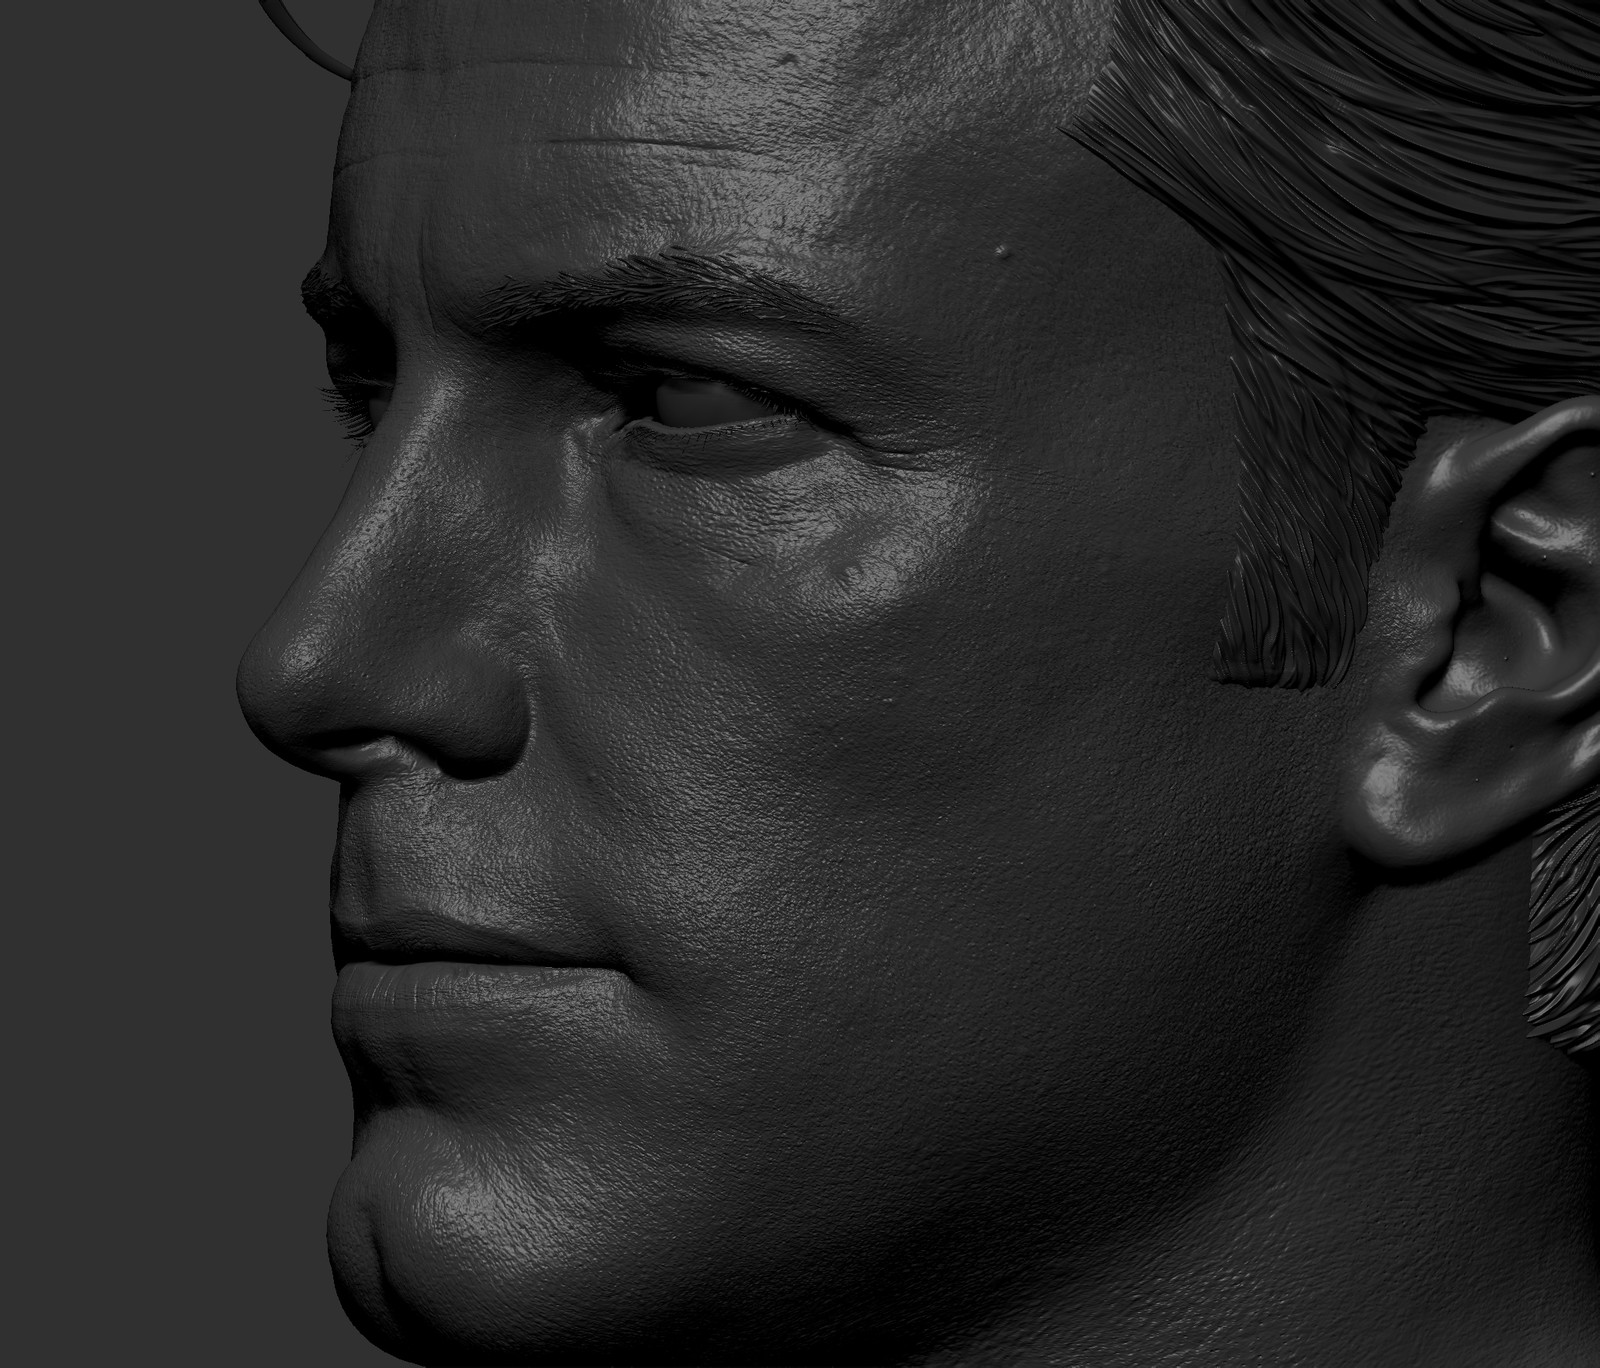 used Texturing XYZ for skin pores